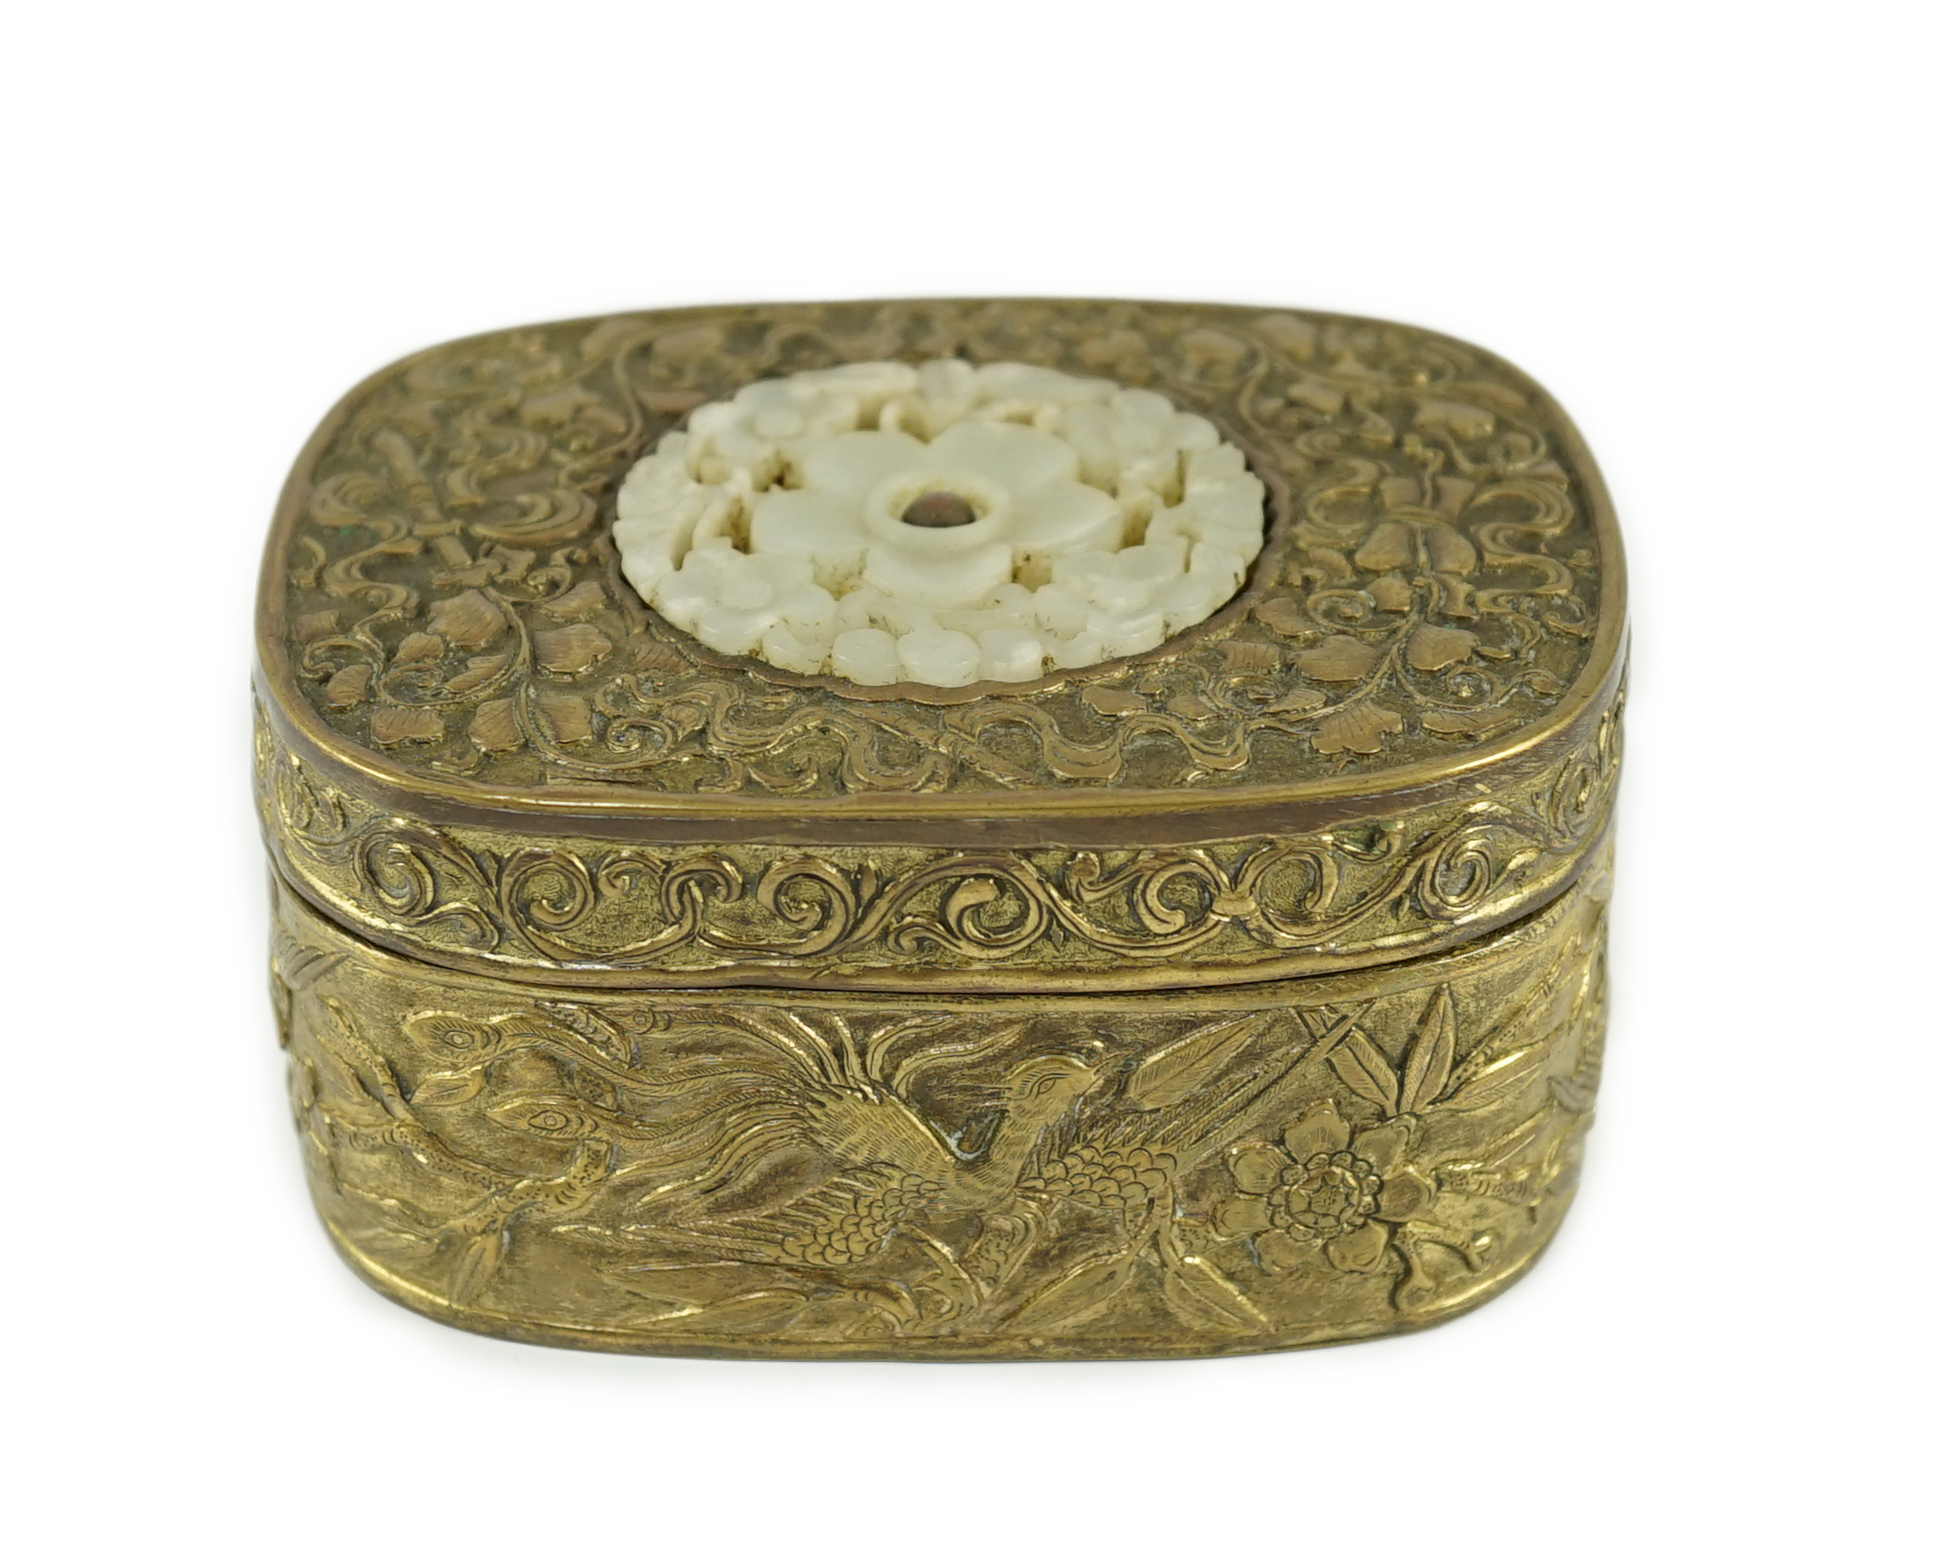 A Chinese jade mounted gilt metal box and cover, 19th century                                                                                                                                                               